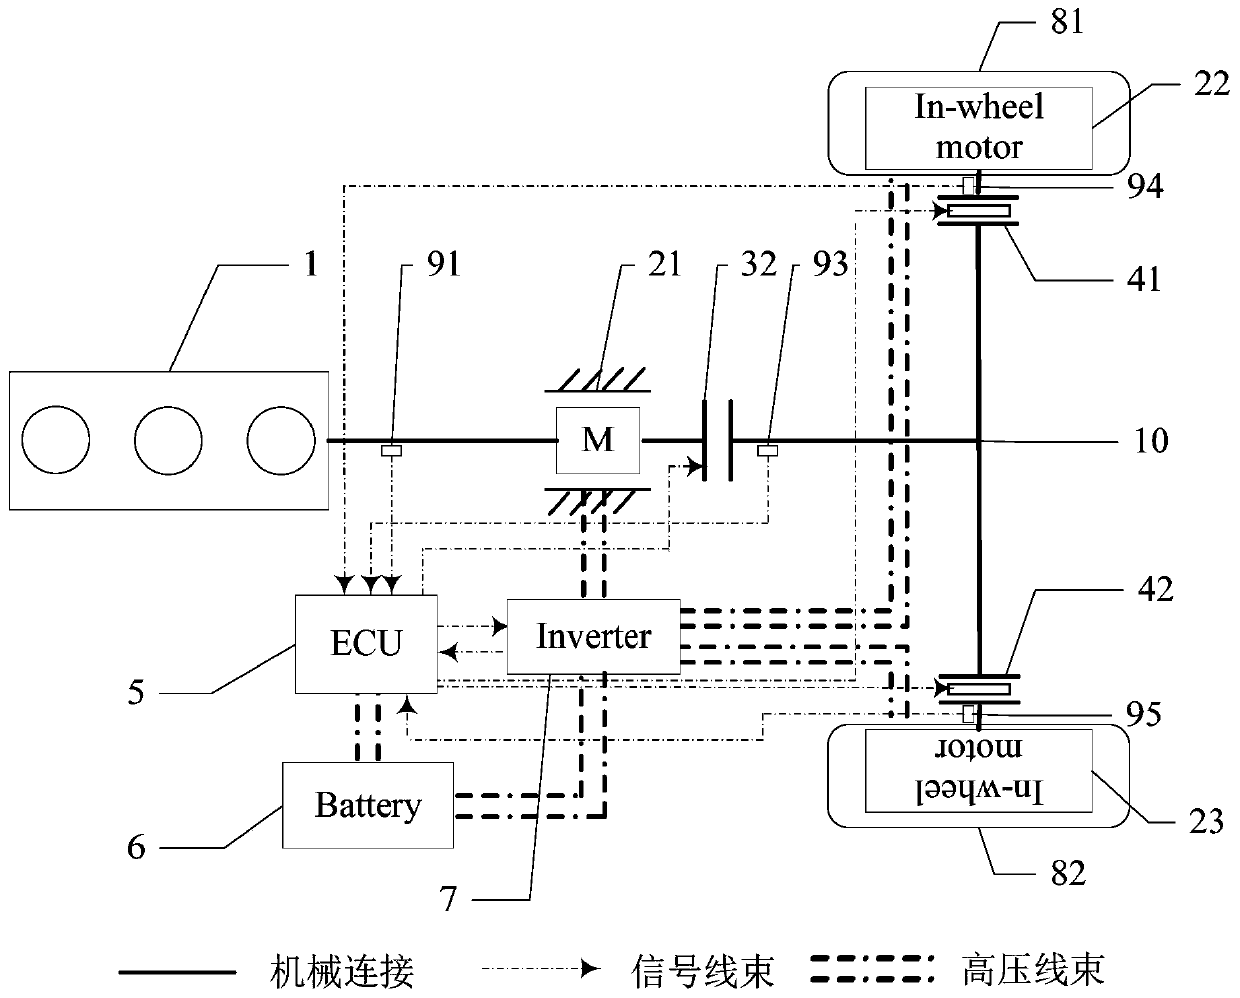 A gasoline-electric hybrid multi-mode vehicle drive system and control method